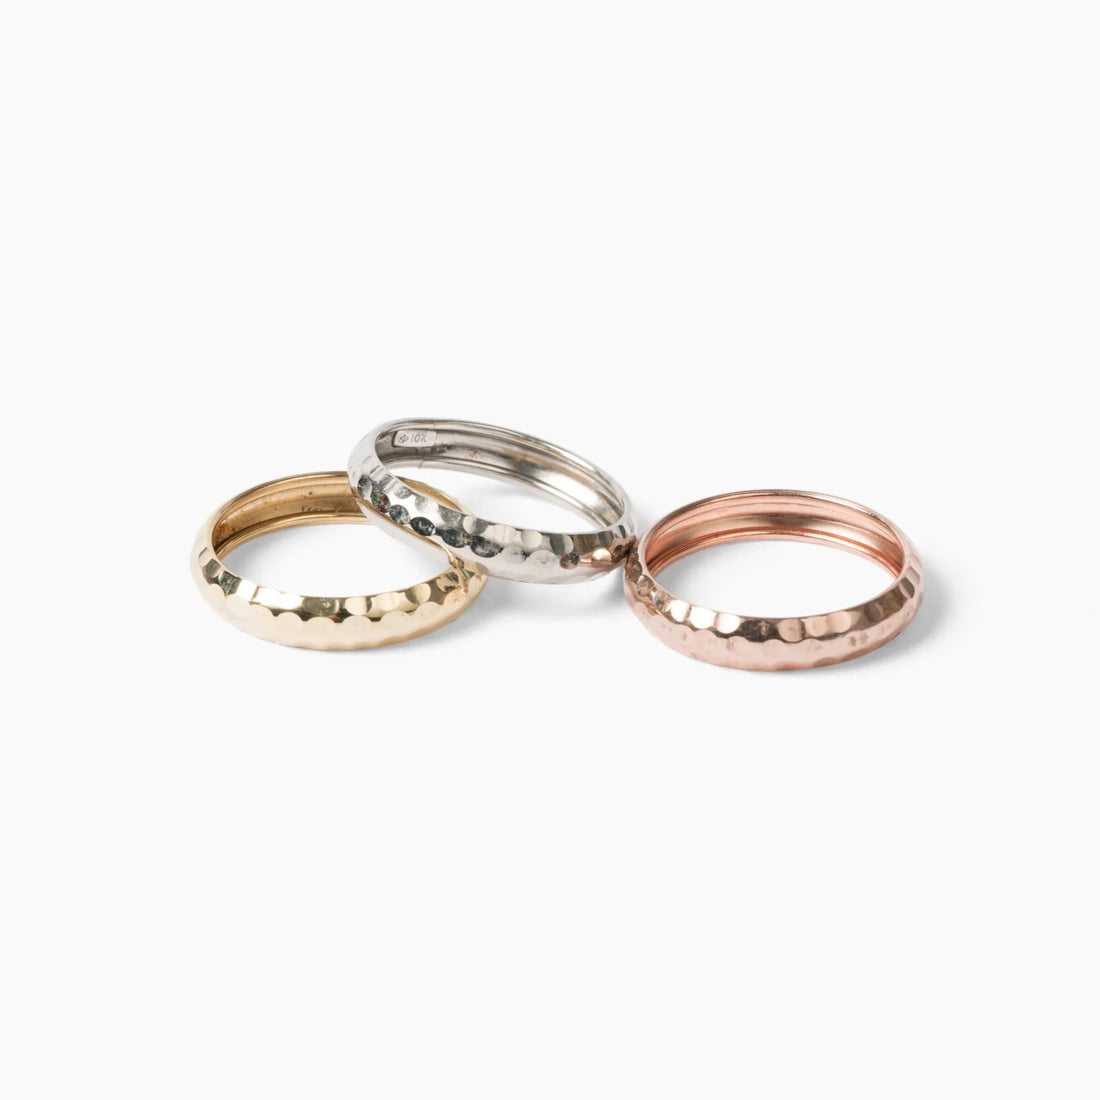 Real Gold Rings vs Gold Plated Rings